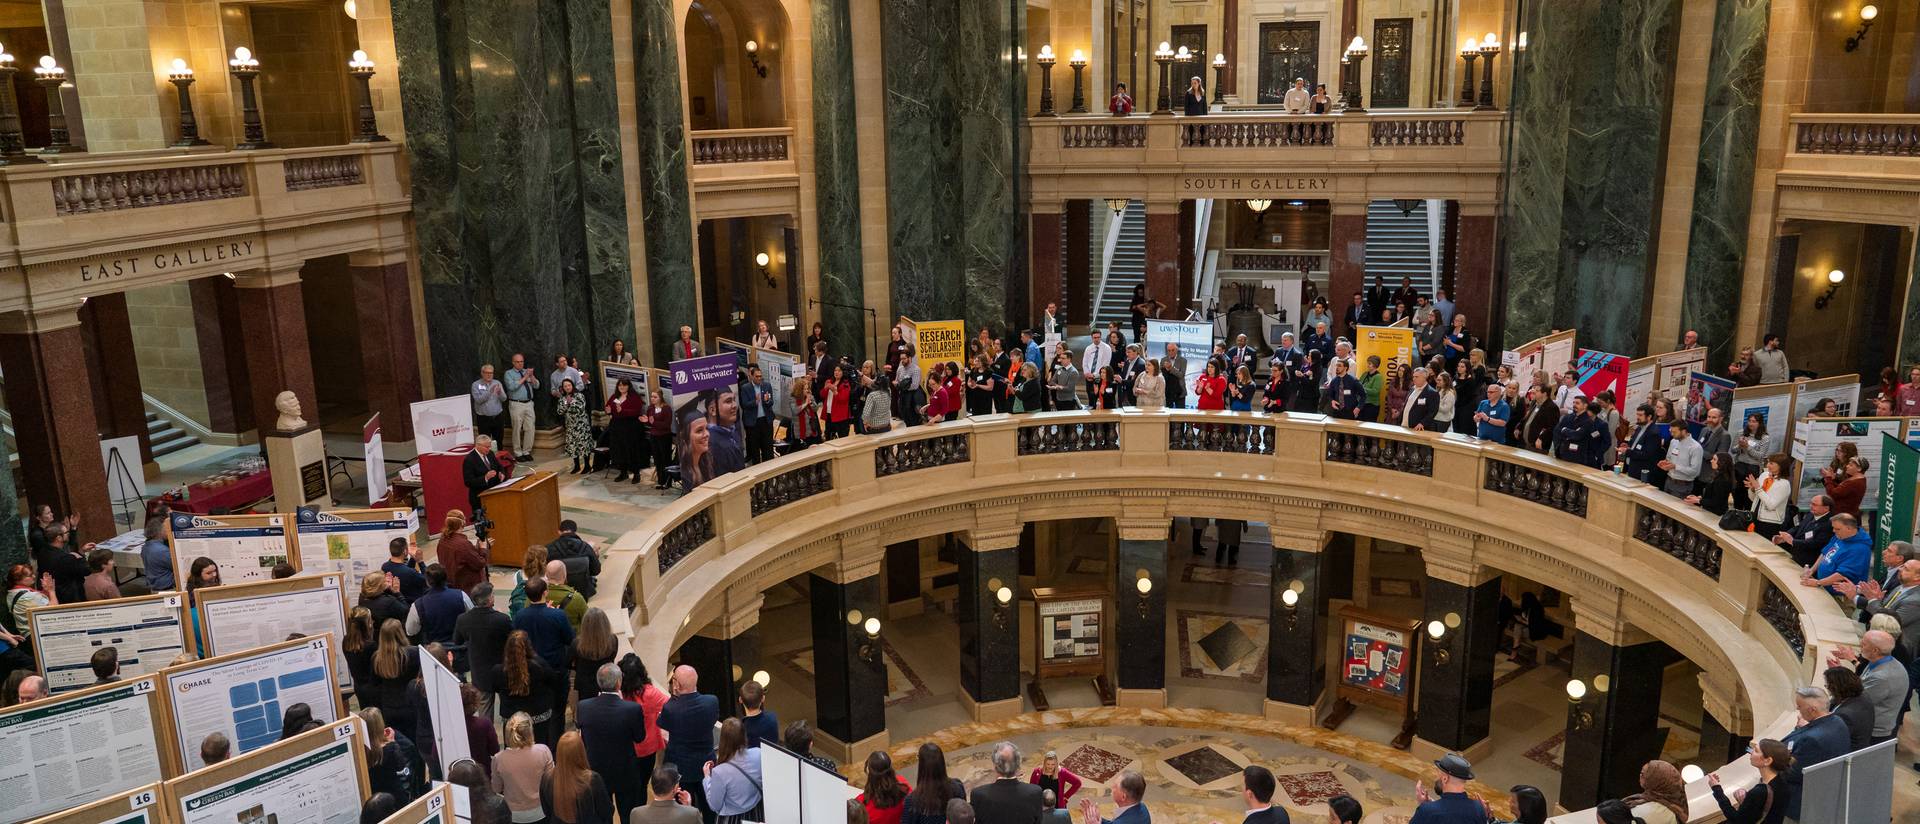 Overhead view of Madison capitol rotunda full of people and student poster presentations, speaker at a podium on left side of rotunda